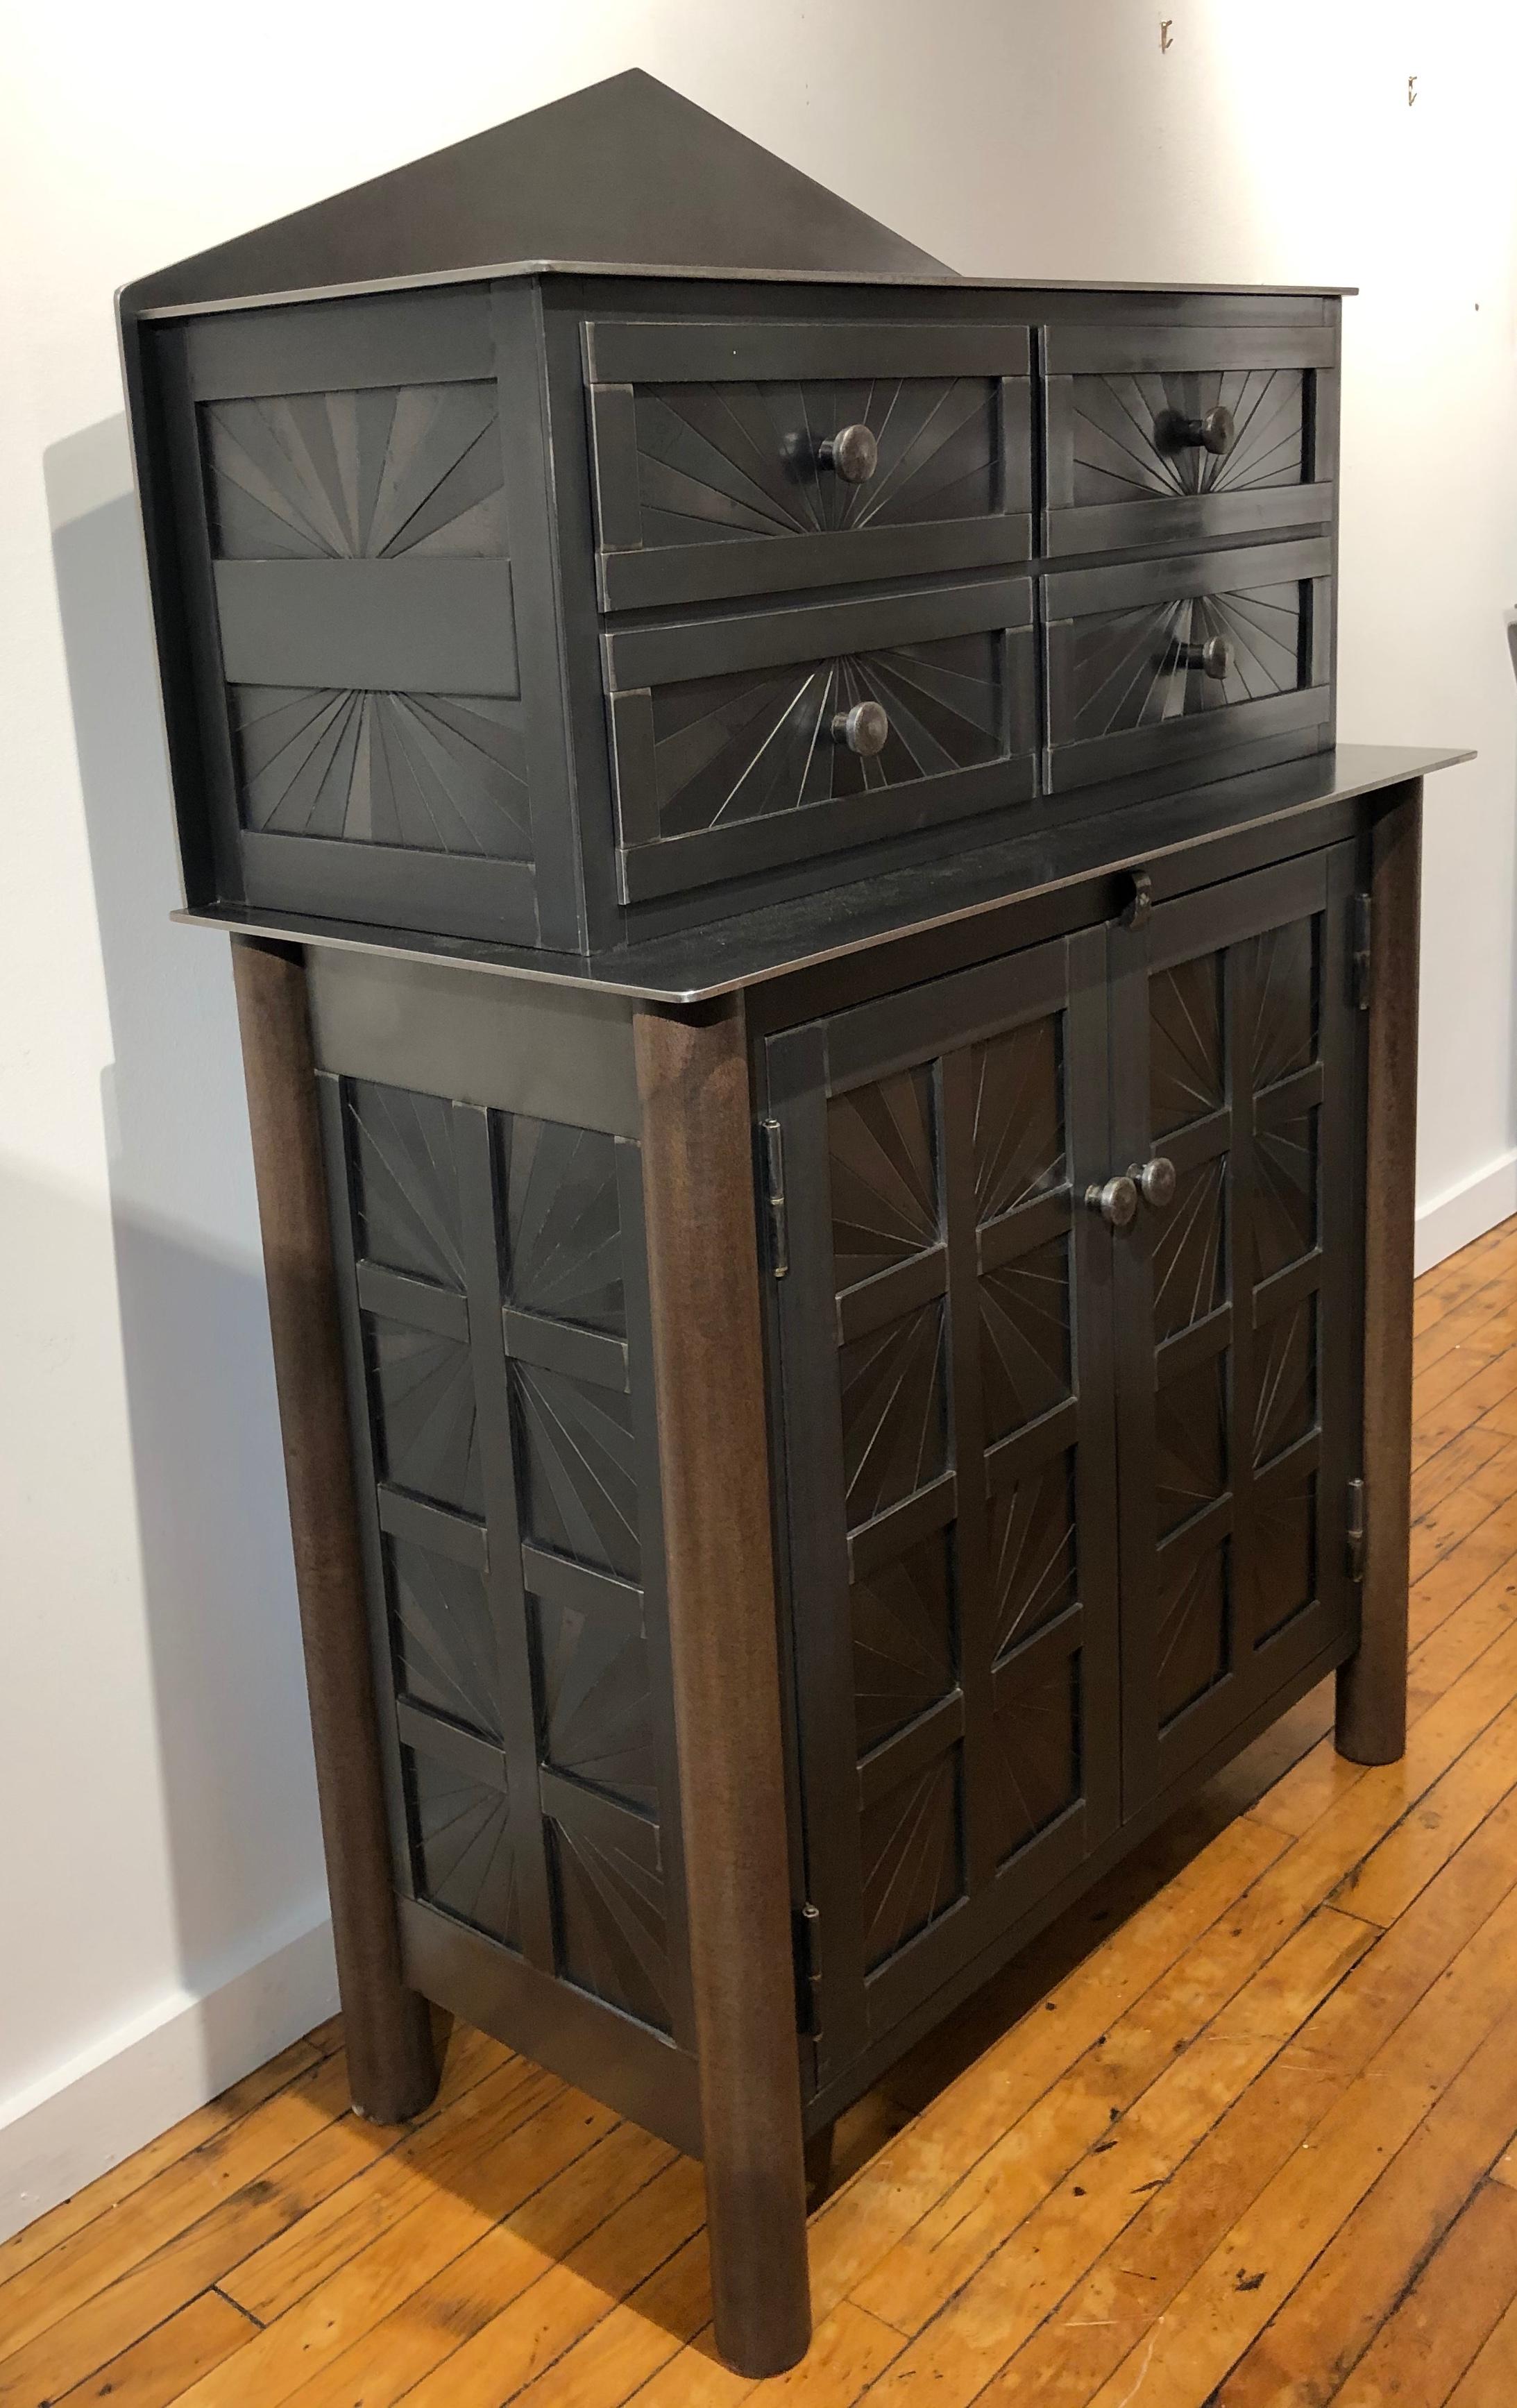 This is a totally functional cupboard is topped with a chest of drawers. It is created from hot rolled steel and found steel. The legs are made from salvaged pipe. The starburst panels are inspired by the Quilts of Gee's Bend Alabama. The blue-gray